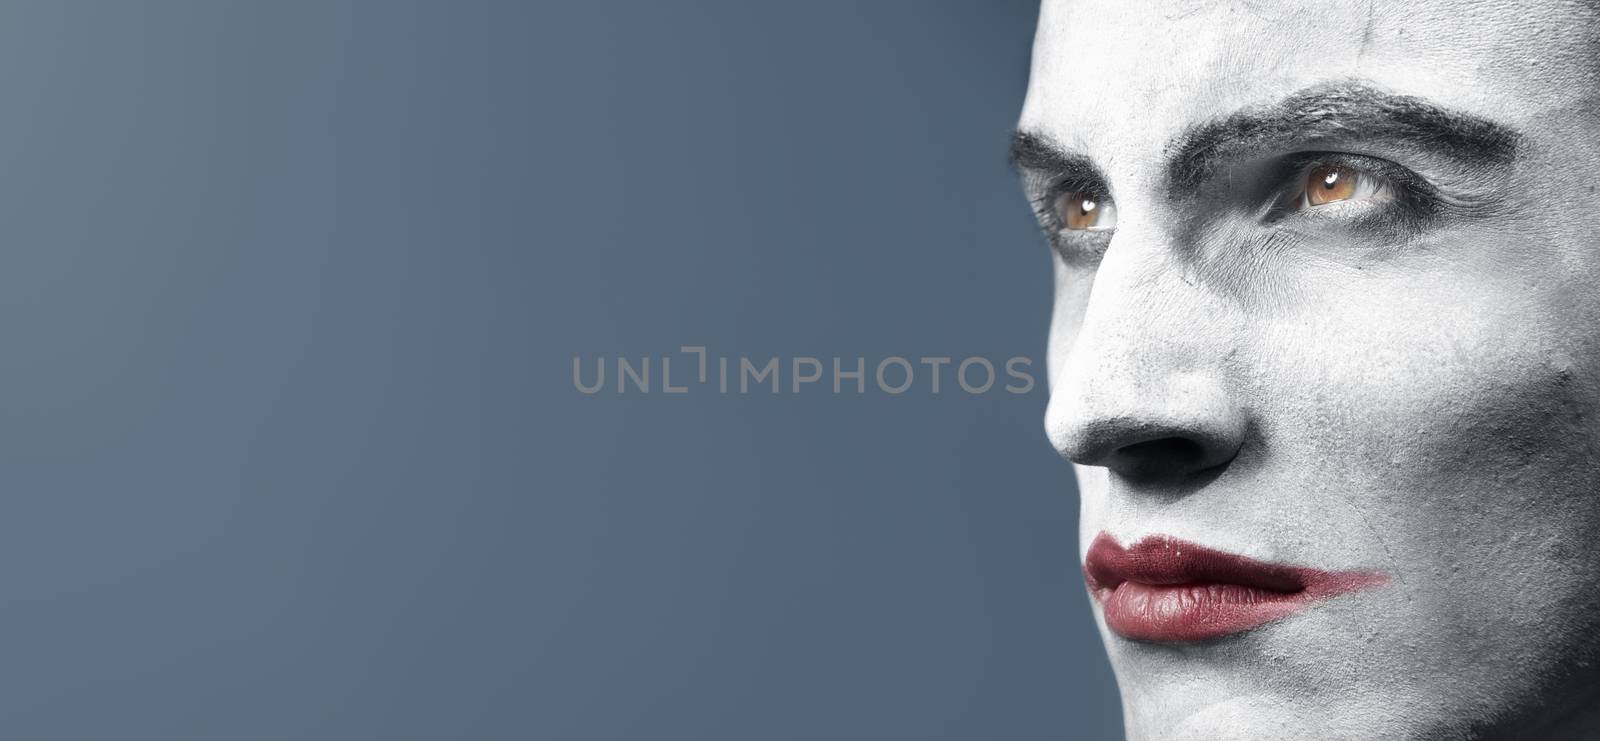 Male head with face-paint outdoors during twilight. Creative colors and darkness added. Horizontal photo with empy space